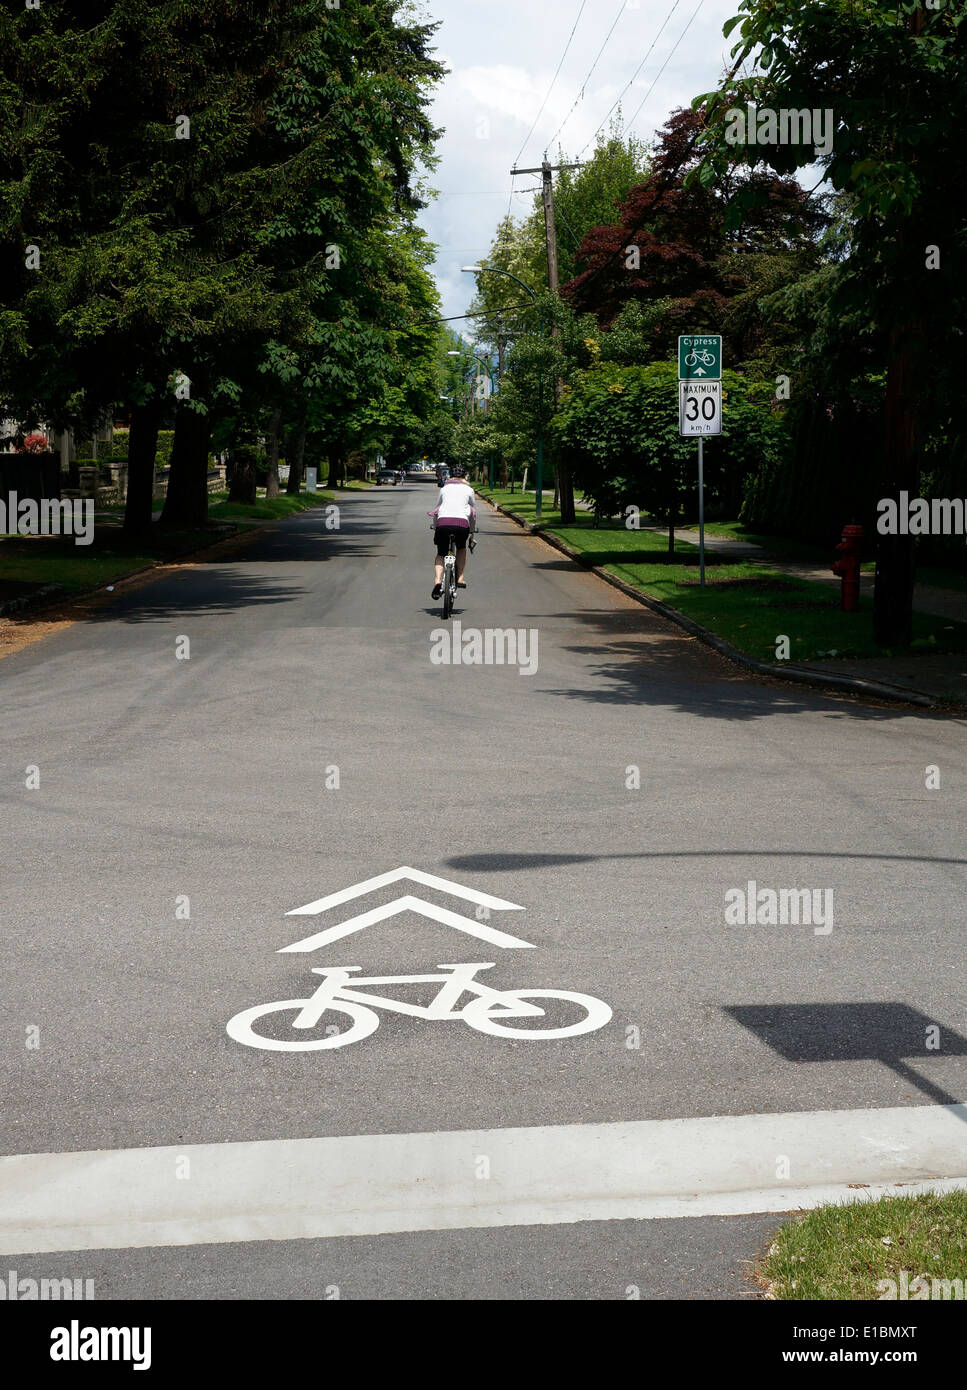 Cyclist in the bicycle lane on Cypress Street in Shaughnessy, Vancouver, BC, Canada Stock Photo